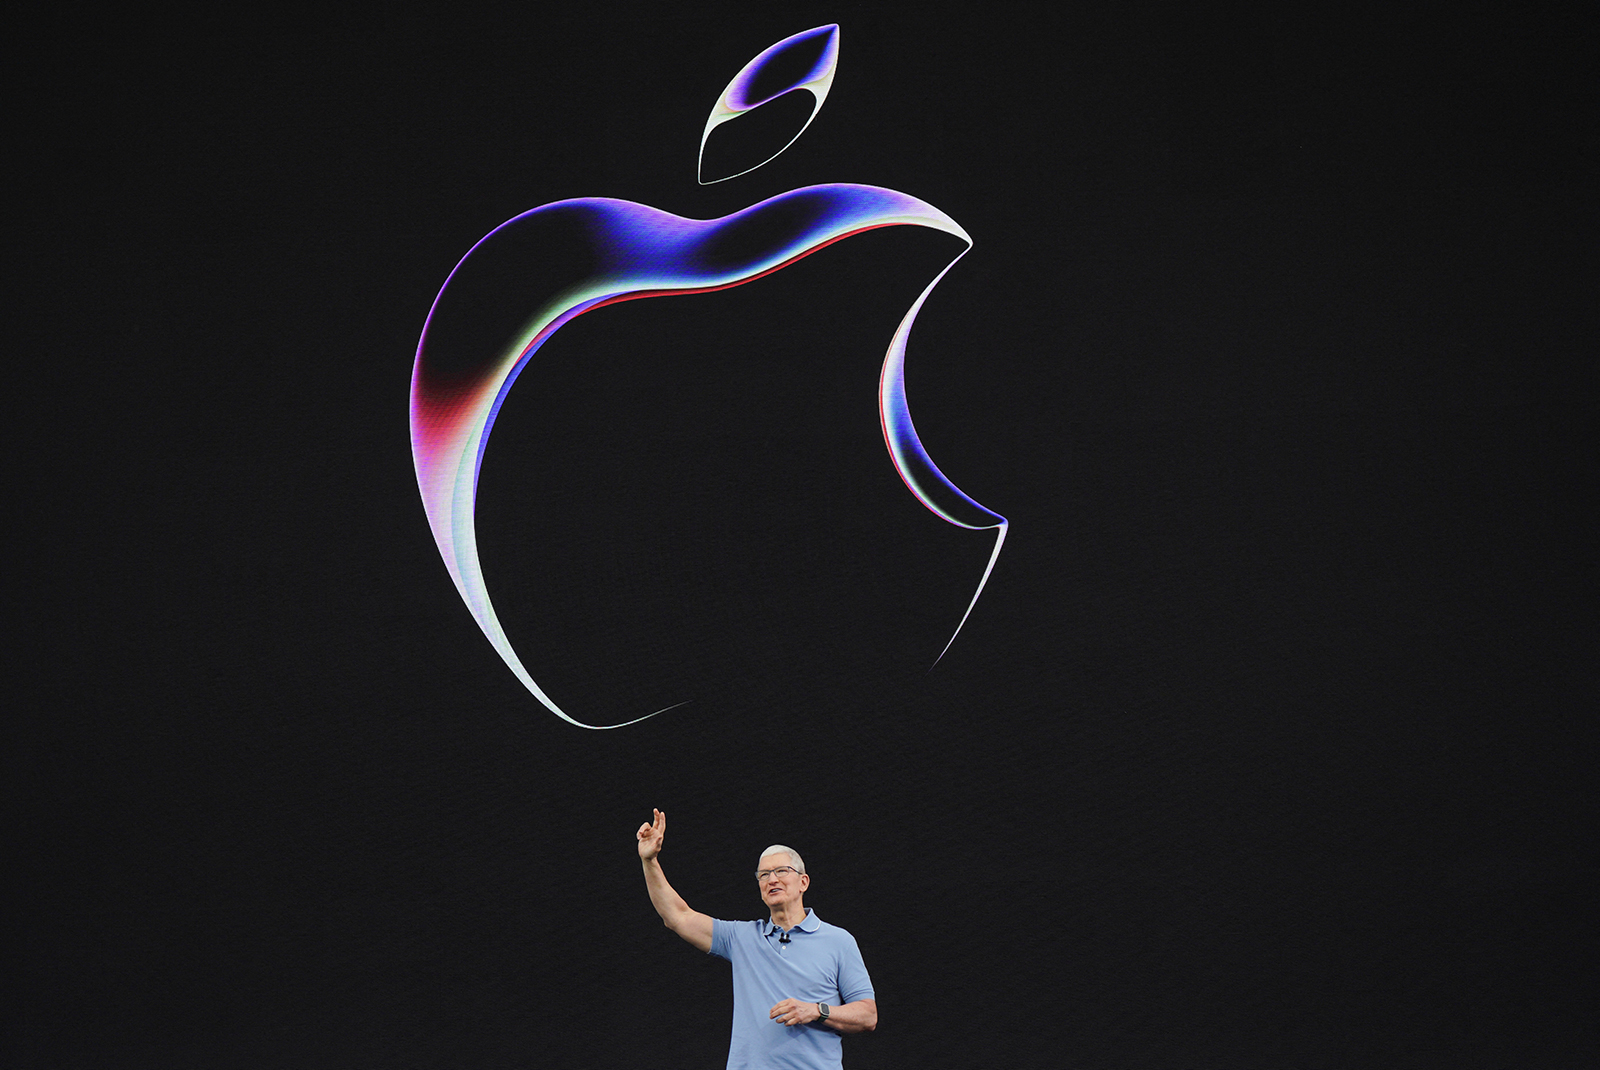 Apple CEO Tim Cook at Apple's annual Worldwide Developers Conference at the company's headquarters in Cupertino, California, on June 5.